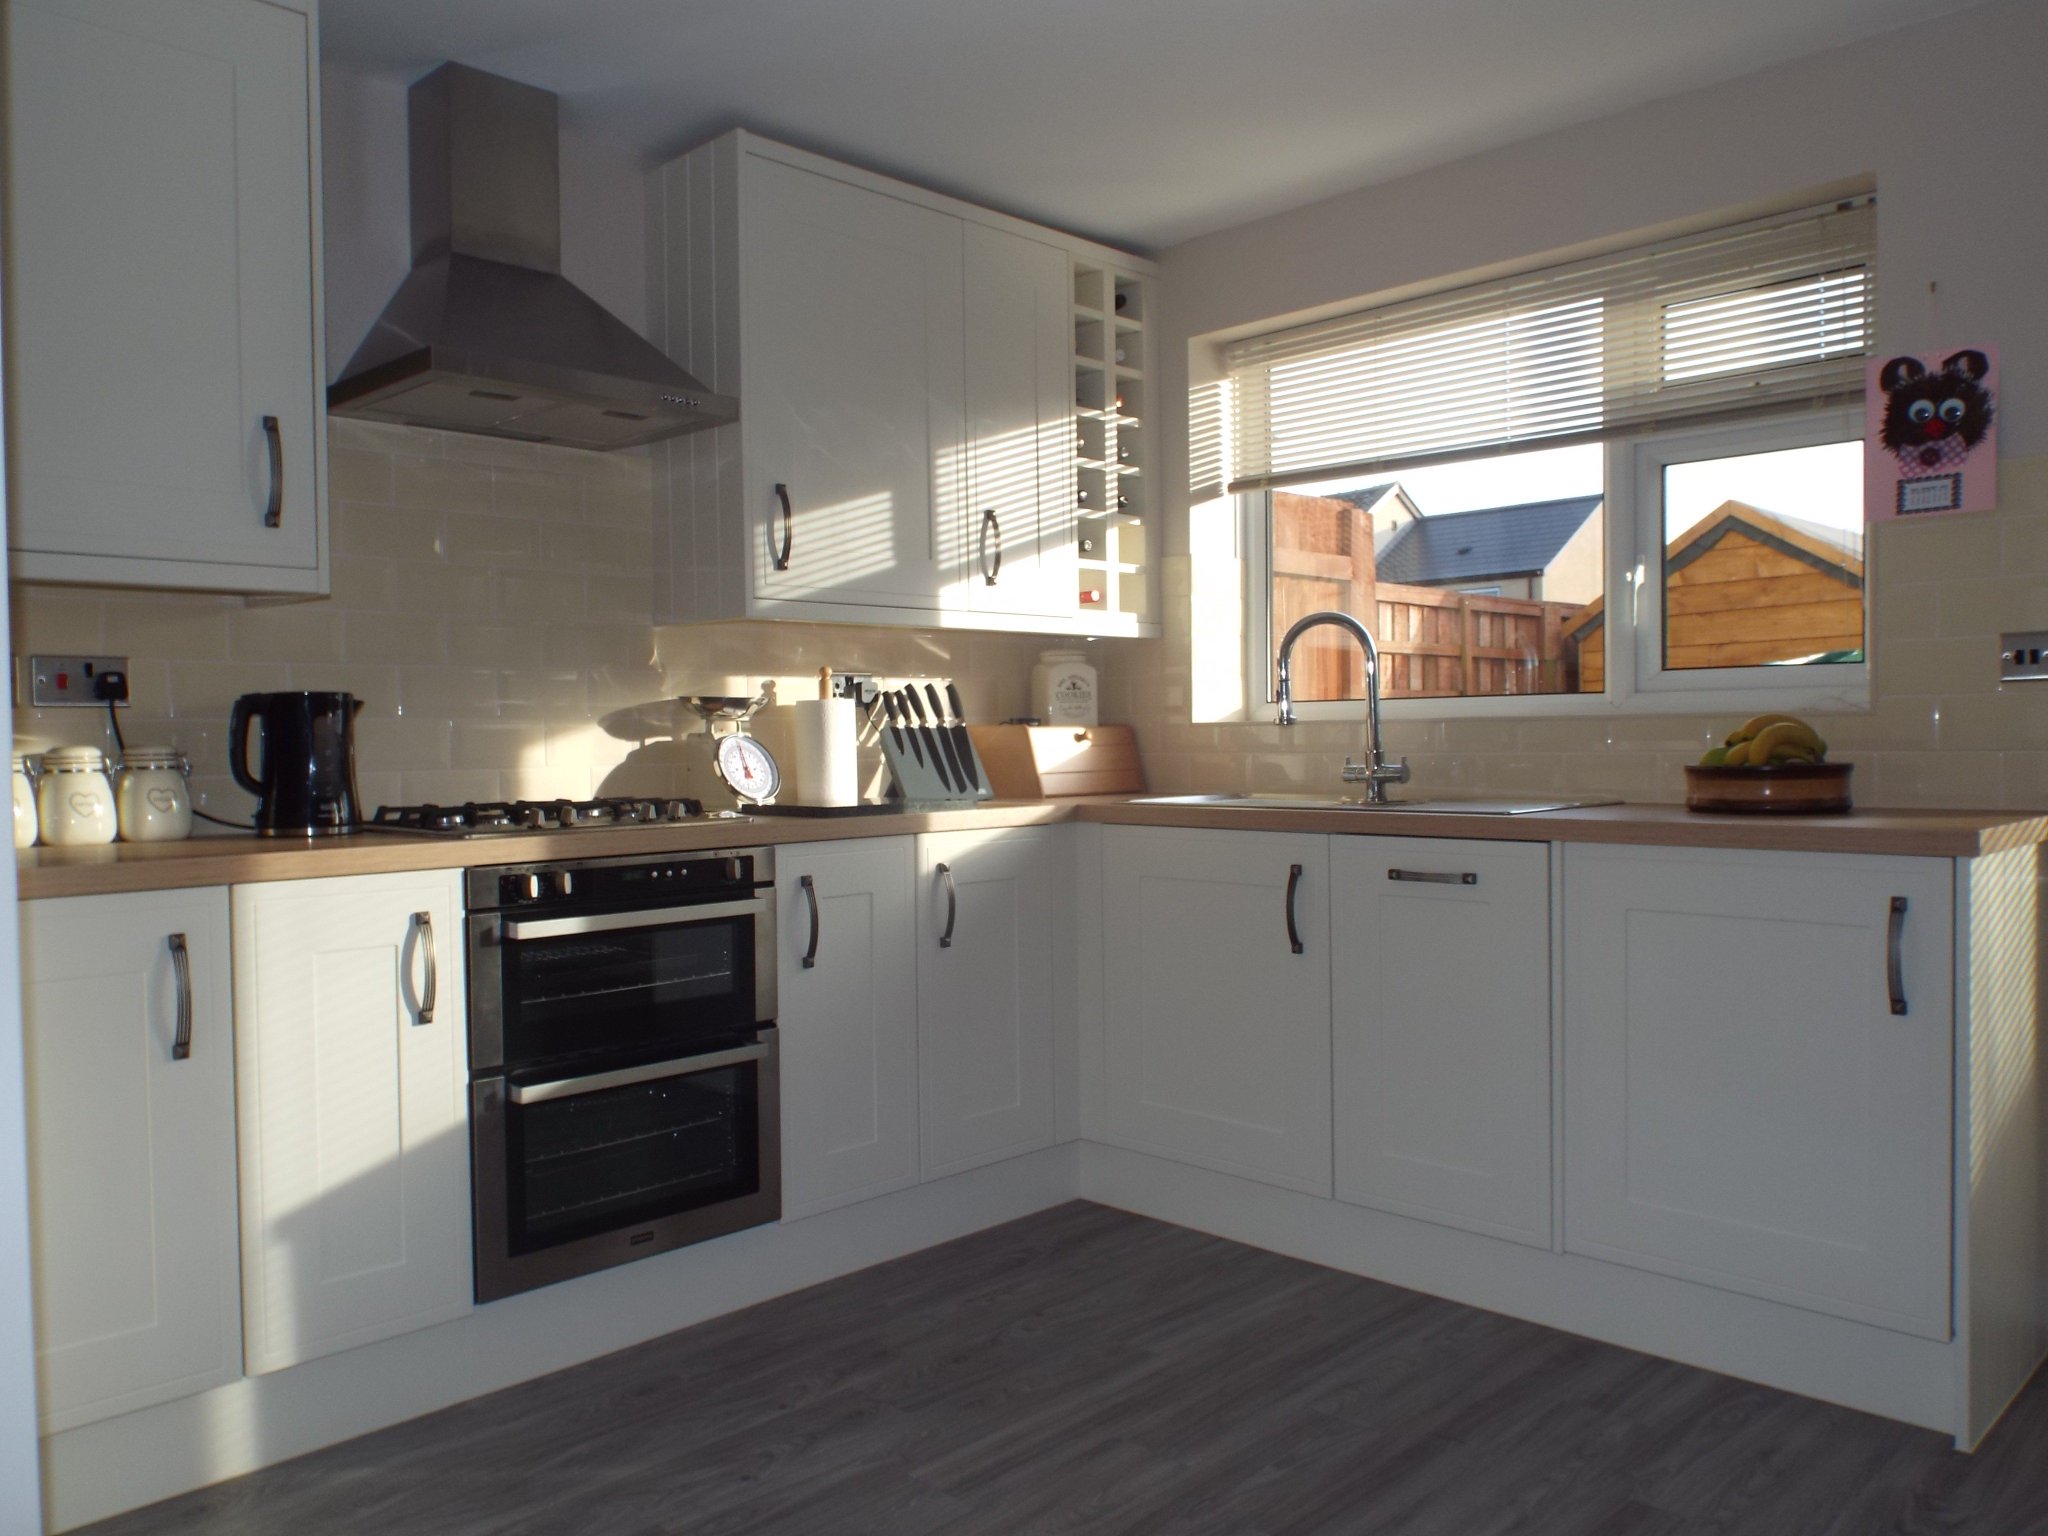 Wren Kitchens On Twitter This Wrenovation Features Our Popular Edwardian Cream Matt Kitchen Finished Coco Bolo Luxury Laminate Worktops And Anne Bow Handles We Think It Looks Stunning Let Us Know